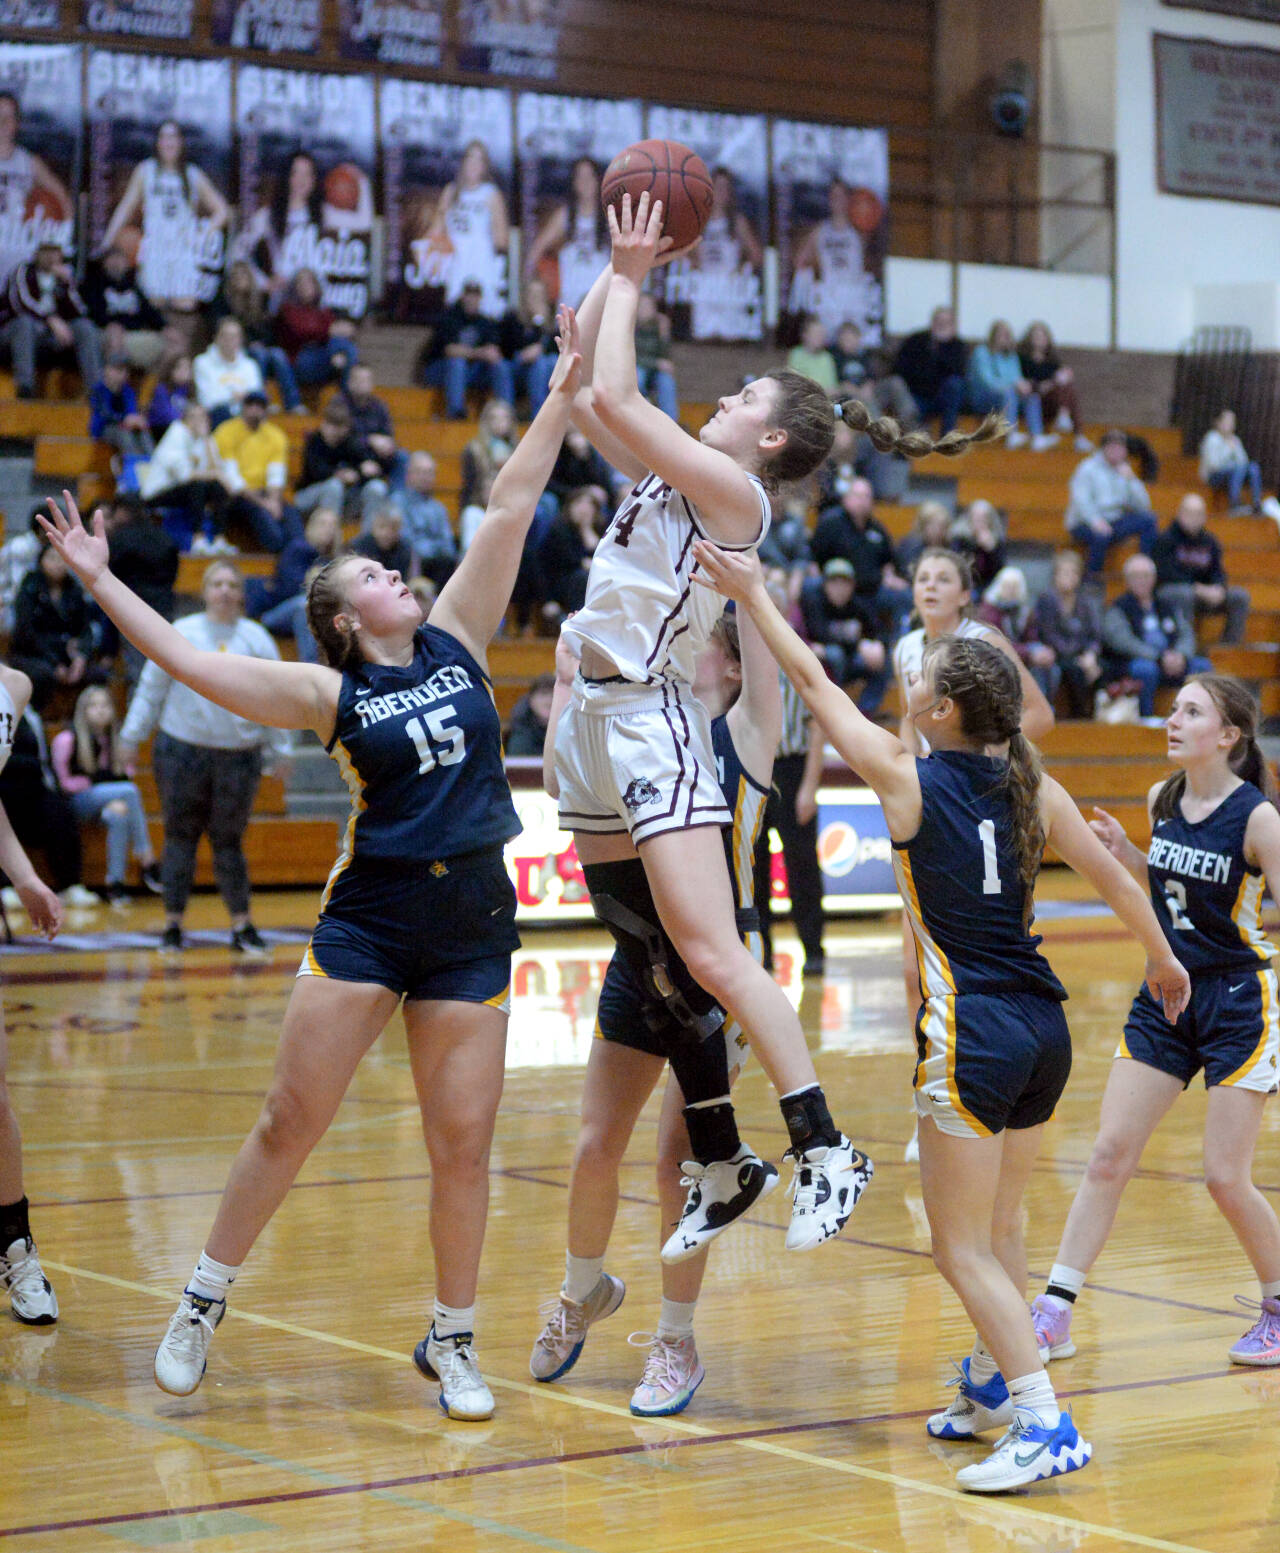 RYAN SPARKS | THE DAILY WORLD Montesano forward McKynnlie Dalan, middle, scores on a jump shot while defended by Aberdeen’s Alviyah Lamont (15) during the Bulldogs’ 59-25 victory on Wednesday in Montesano.